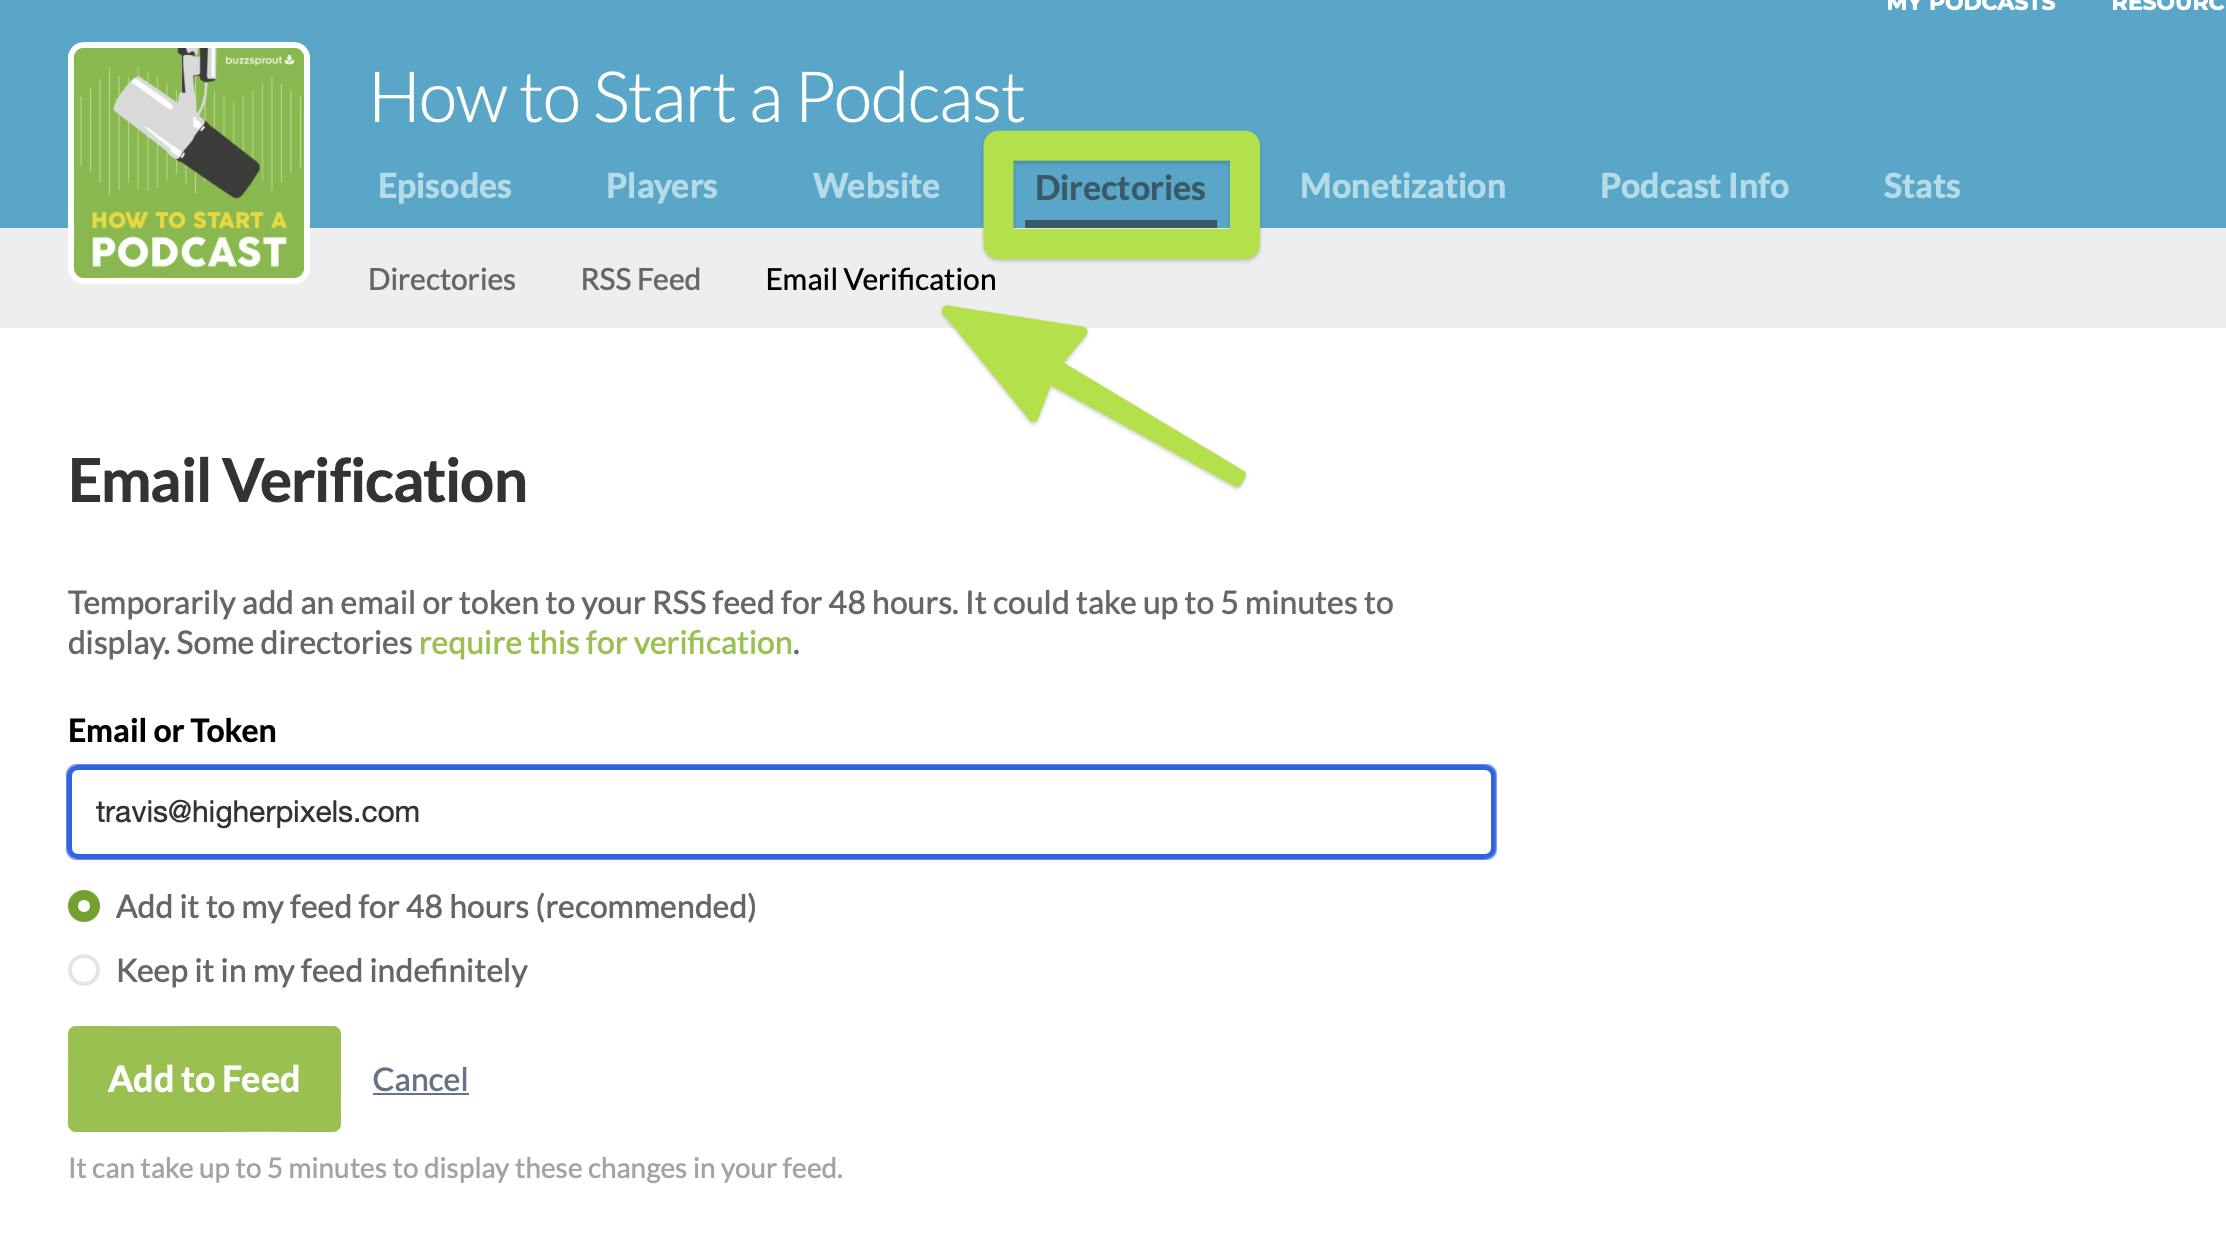 How to embed Spotify podcast on your WordPress website for FREE?